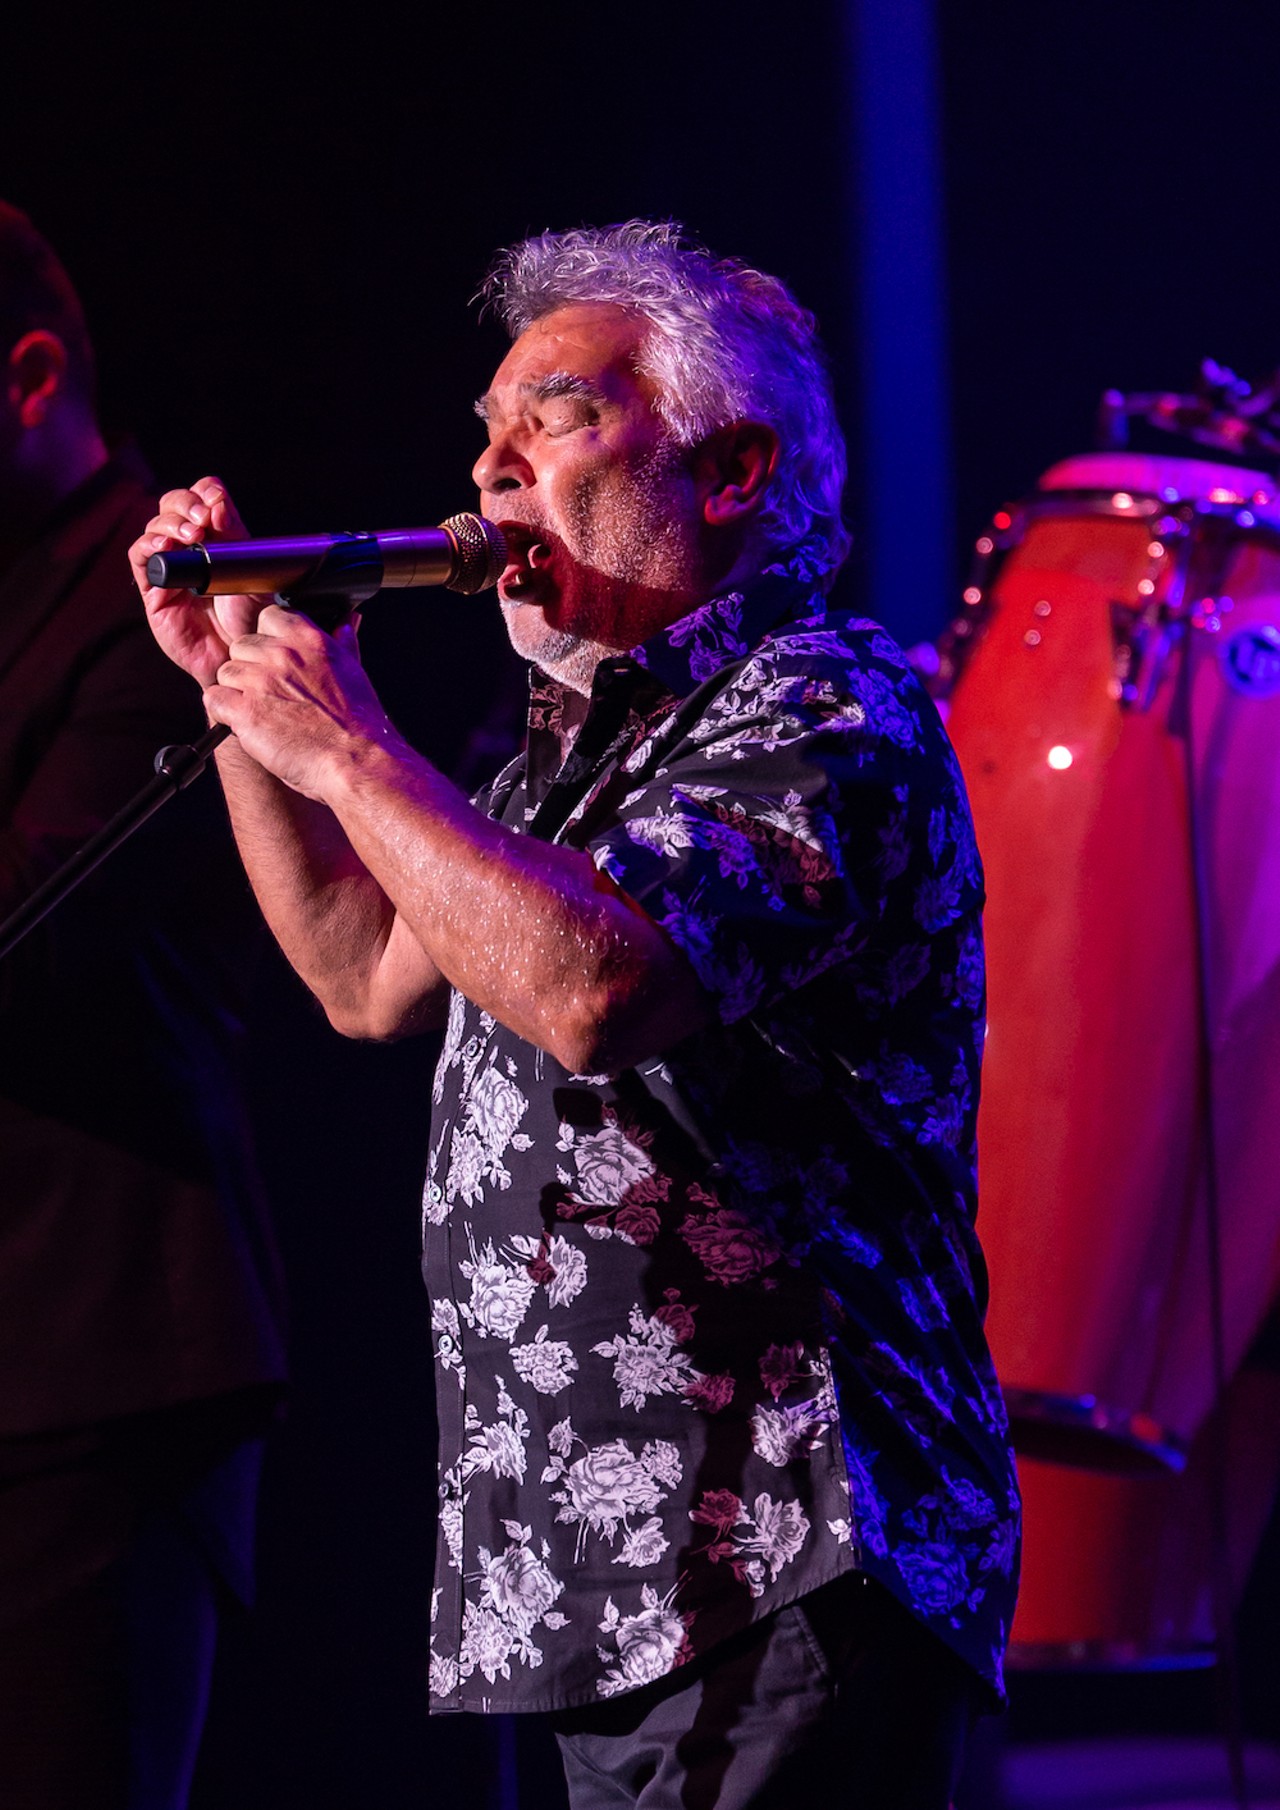 Photos of Latin music favorite Gipsy Kings at Ruth Eckerd Hall in Clearwater